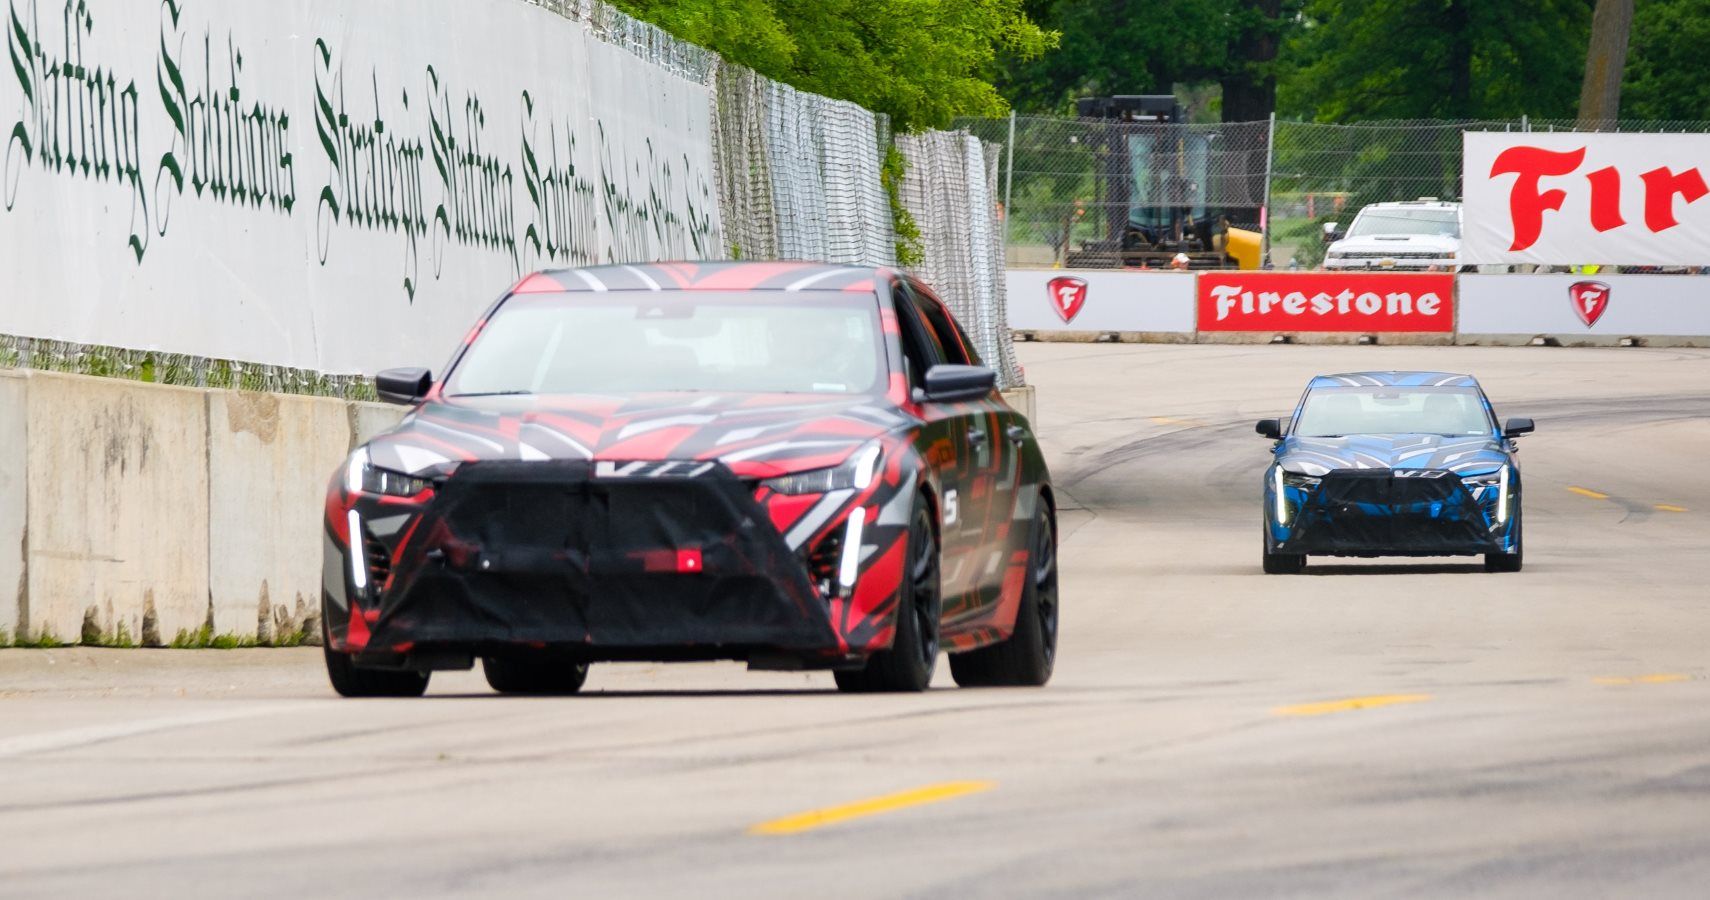 Cadillac offers a sneak peek at the future of Cadillac’s V-Series as two prototypes take a lap around the Chevrolet Detroit Grand Prix presented by Lear track Saturday, June 1, 2019 on Belle Isle in Detroit, Michigan. General Motors President Mark Reuss and GM Vice President Global Product Ken Morris drive the prototypes, which represent the next step in Cadillac’s V-Series performance legacy. (Photo by Steve Fecht for Cadillac)